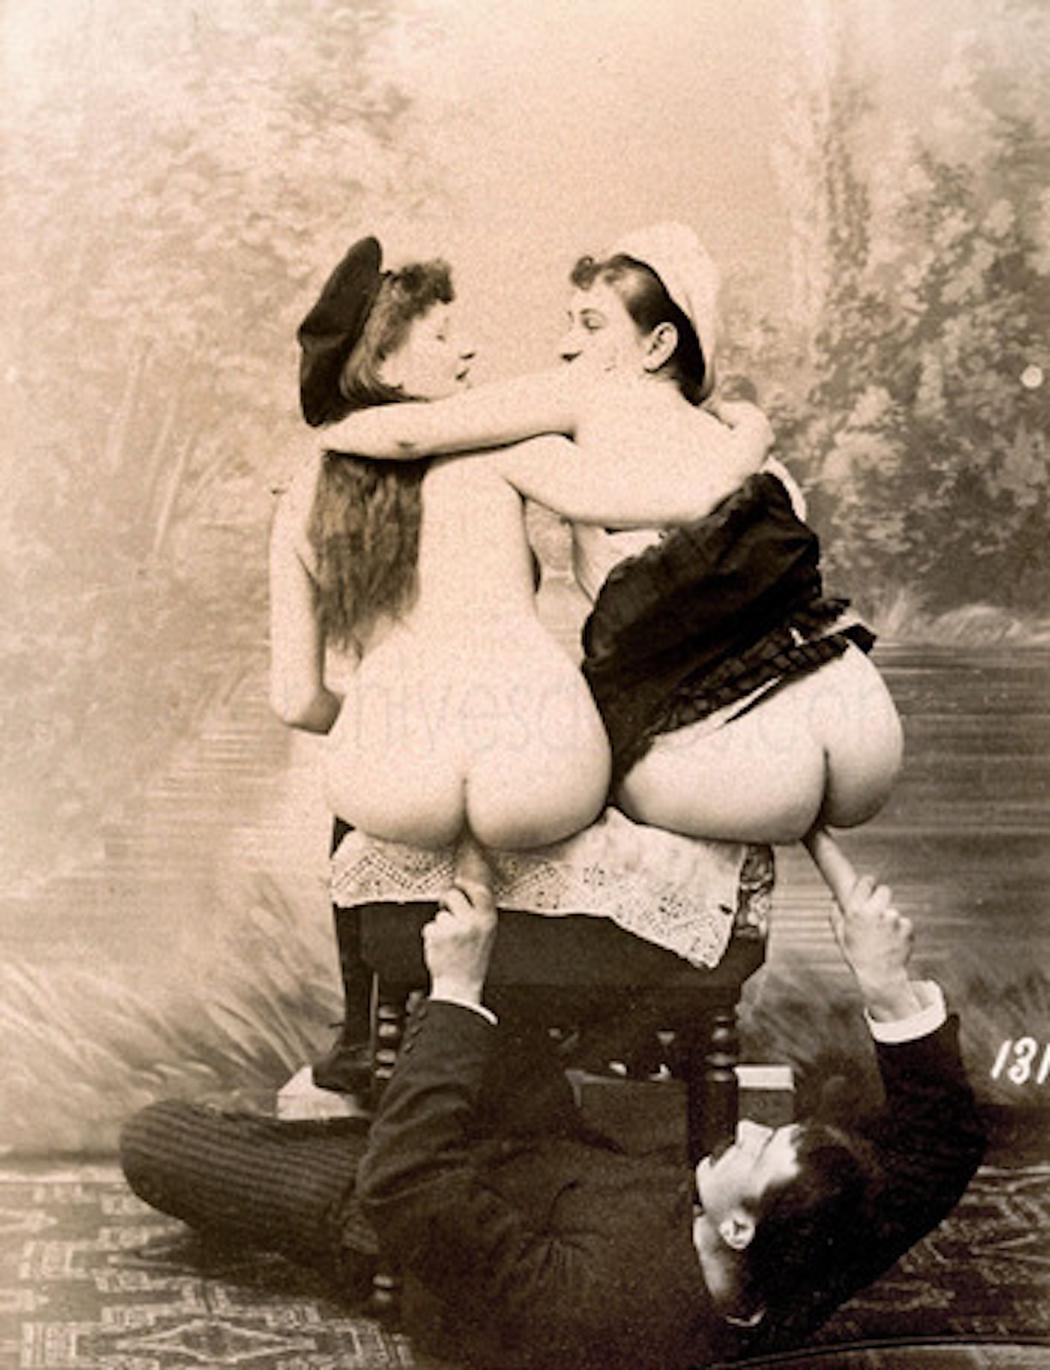 Porn from the 1800s